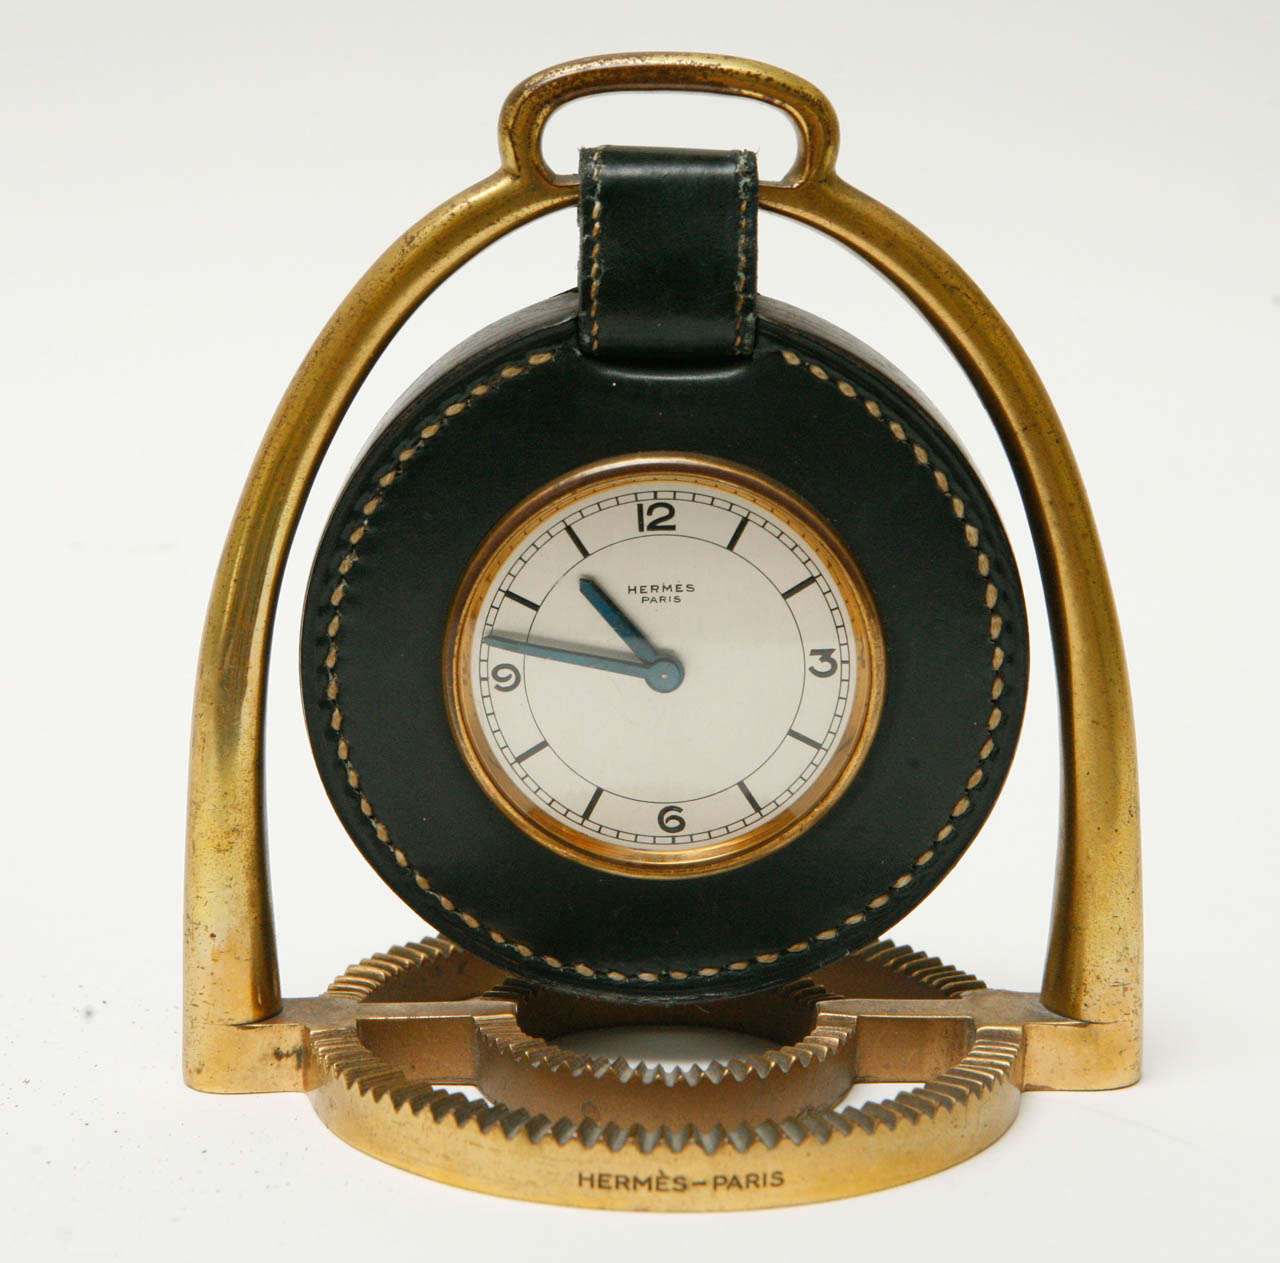 A leather and brass stirrup clock designed by Paul Dupre Lafon for Hermès. The circular base has an indented ribbed design topped by an arch, depicting a stylized stirrup, from which hangs a round clock with Swiss movement and a black leather frame